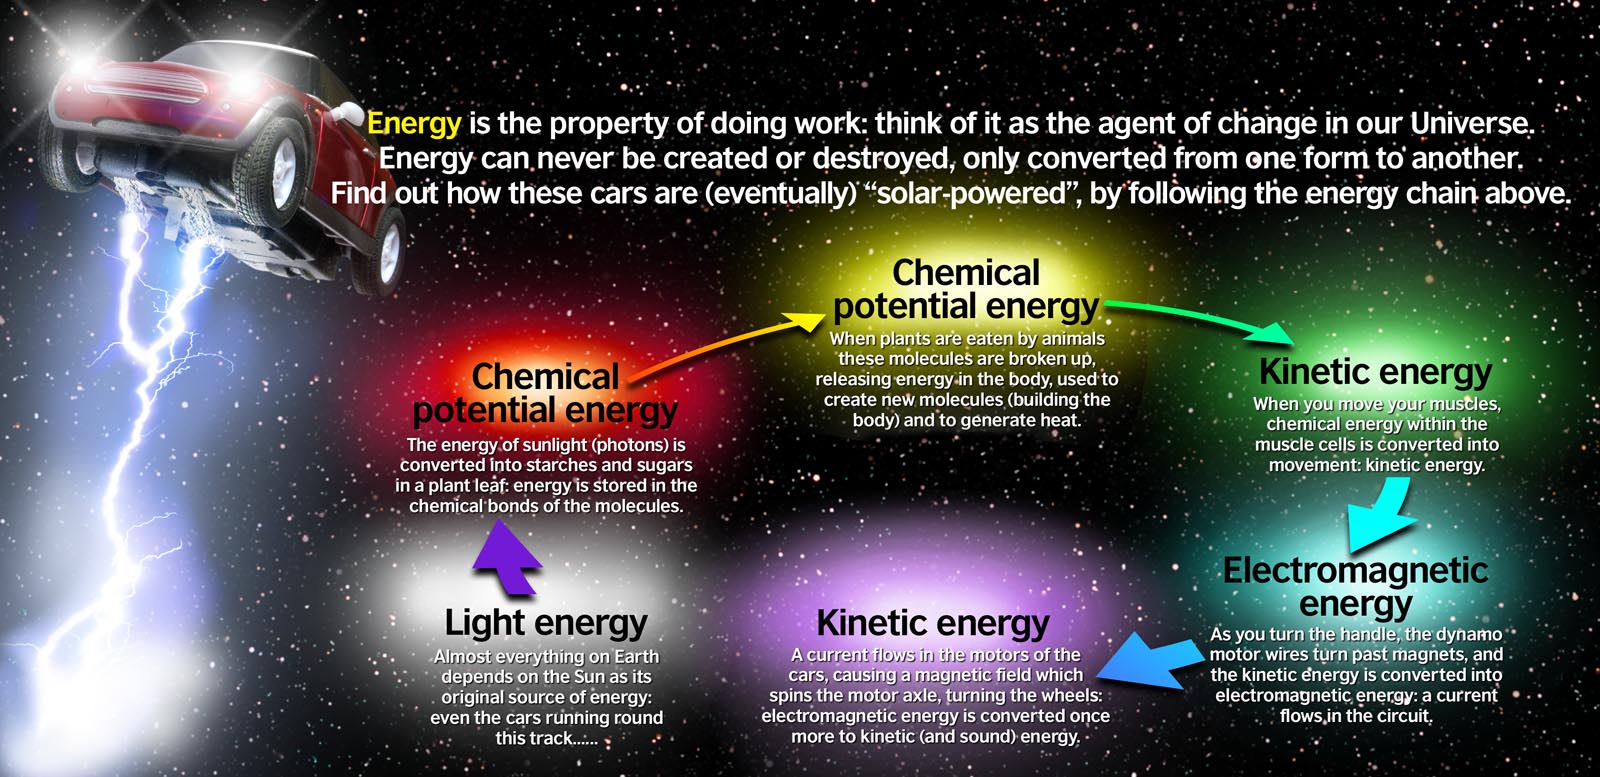 What is a change from one form of energy into another?